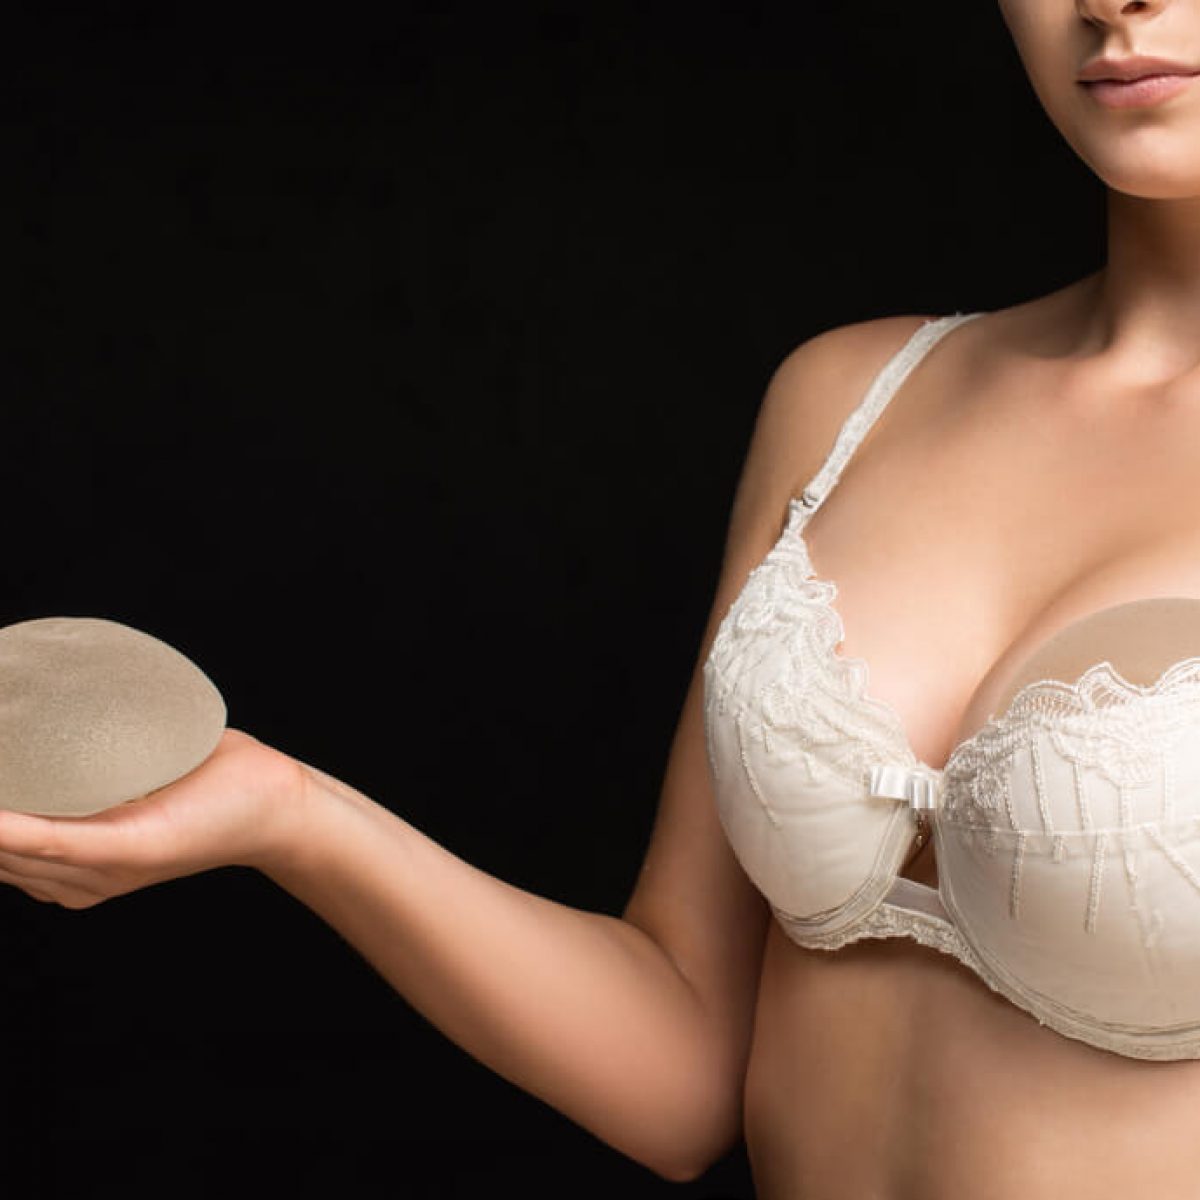 https://hdnfmc.com/wp-content/uploads/2019/11/teardrop-breast-implants-say-hello-to-perfect-breast-shape-1200x1200.jpg